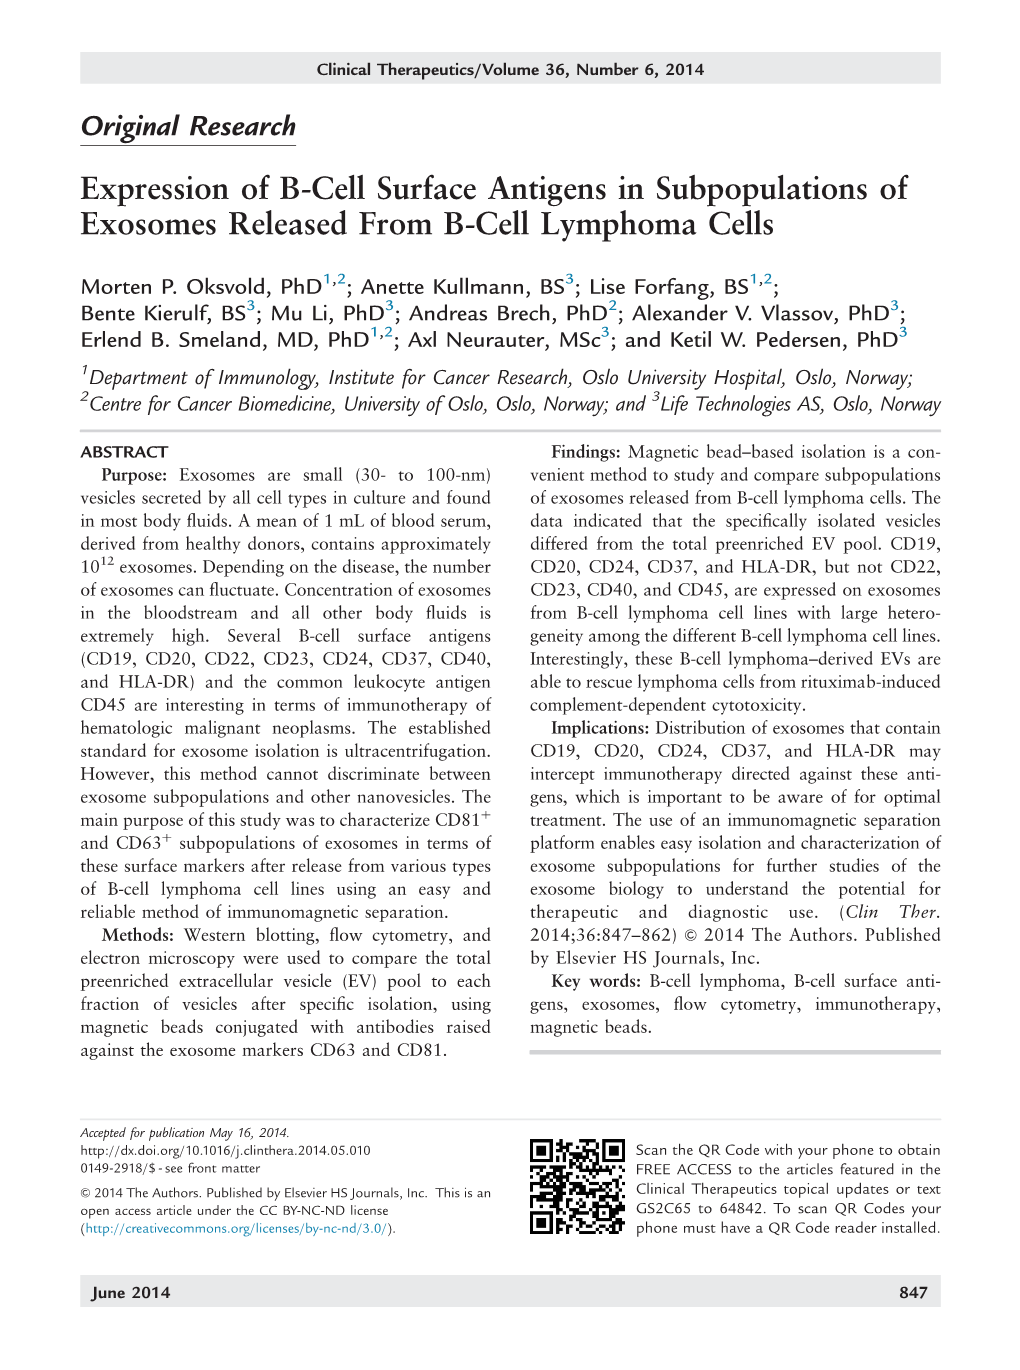 Expression of B-Cell Surface Antigens in Subpopulations of Exosomes Released from B-Cell Lymphoma Cells